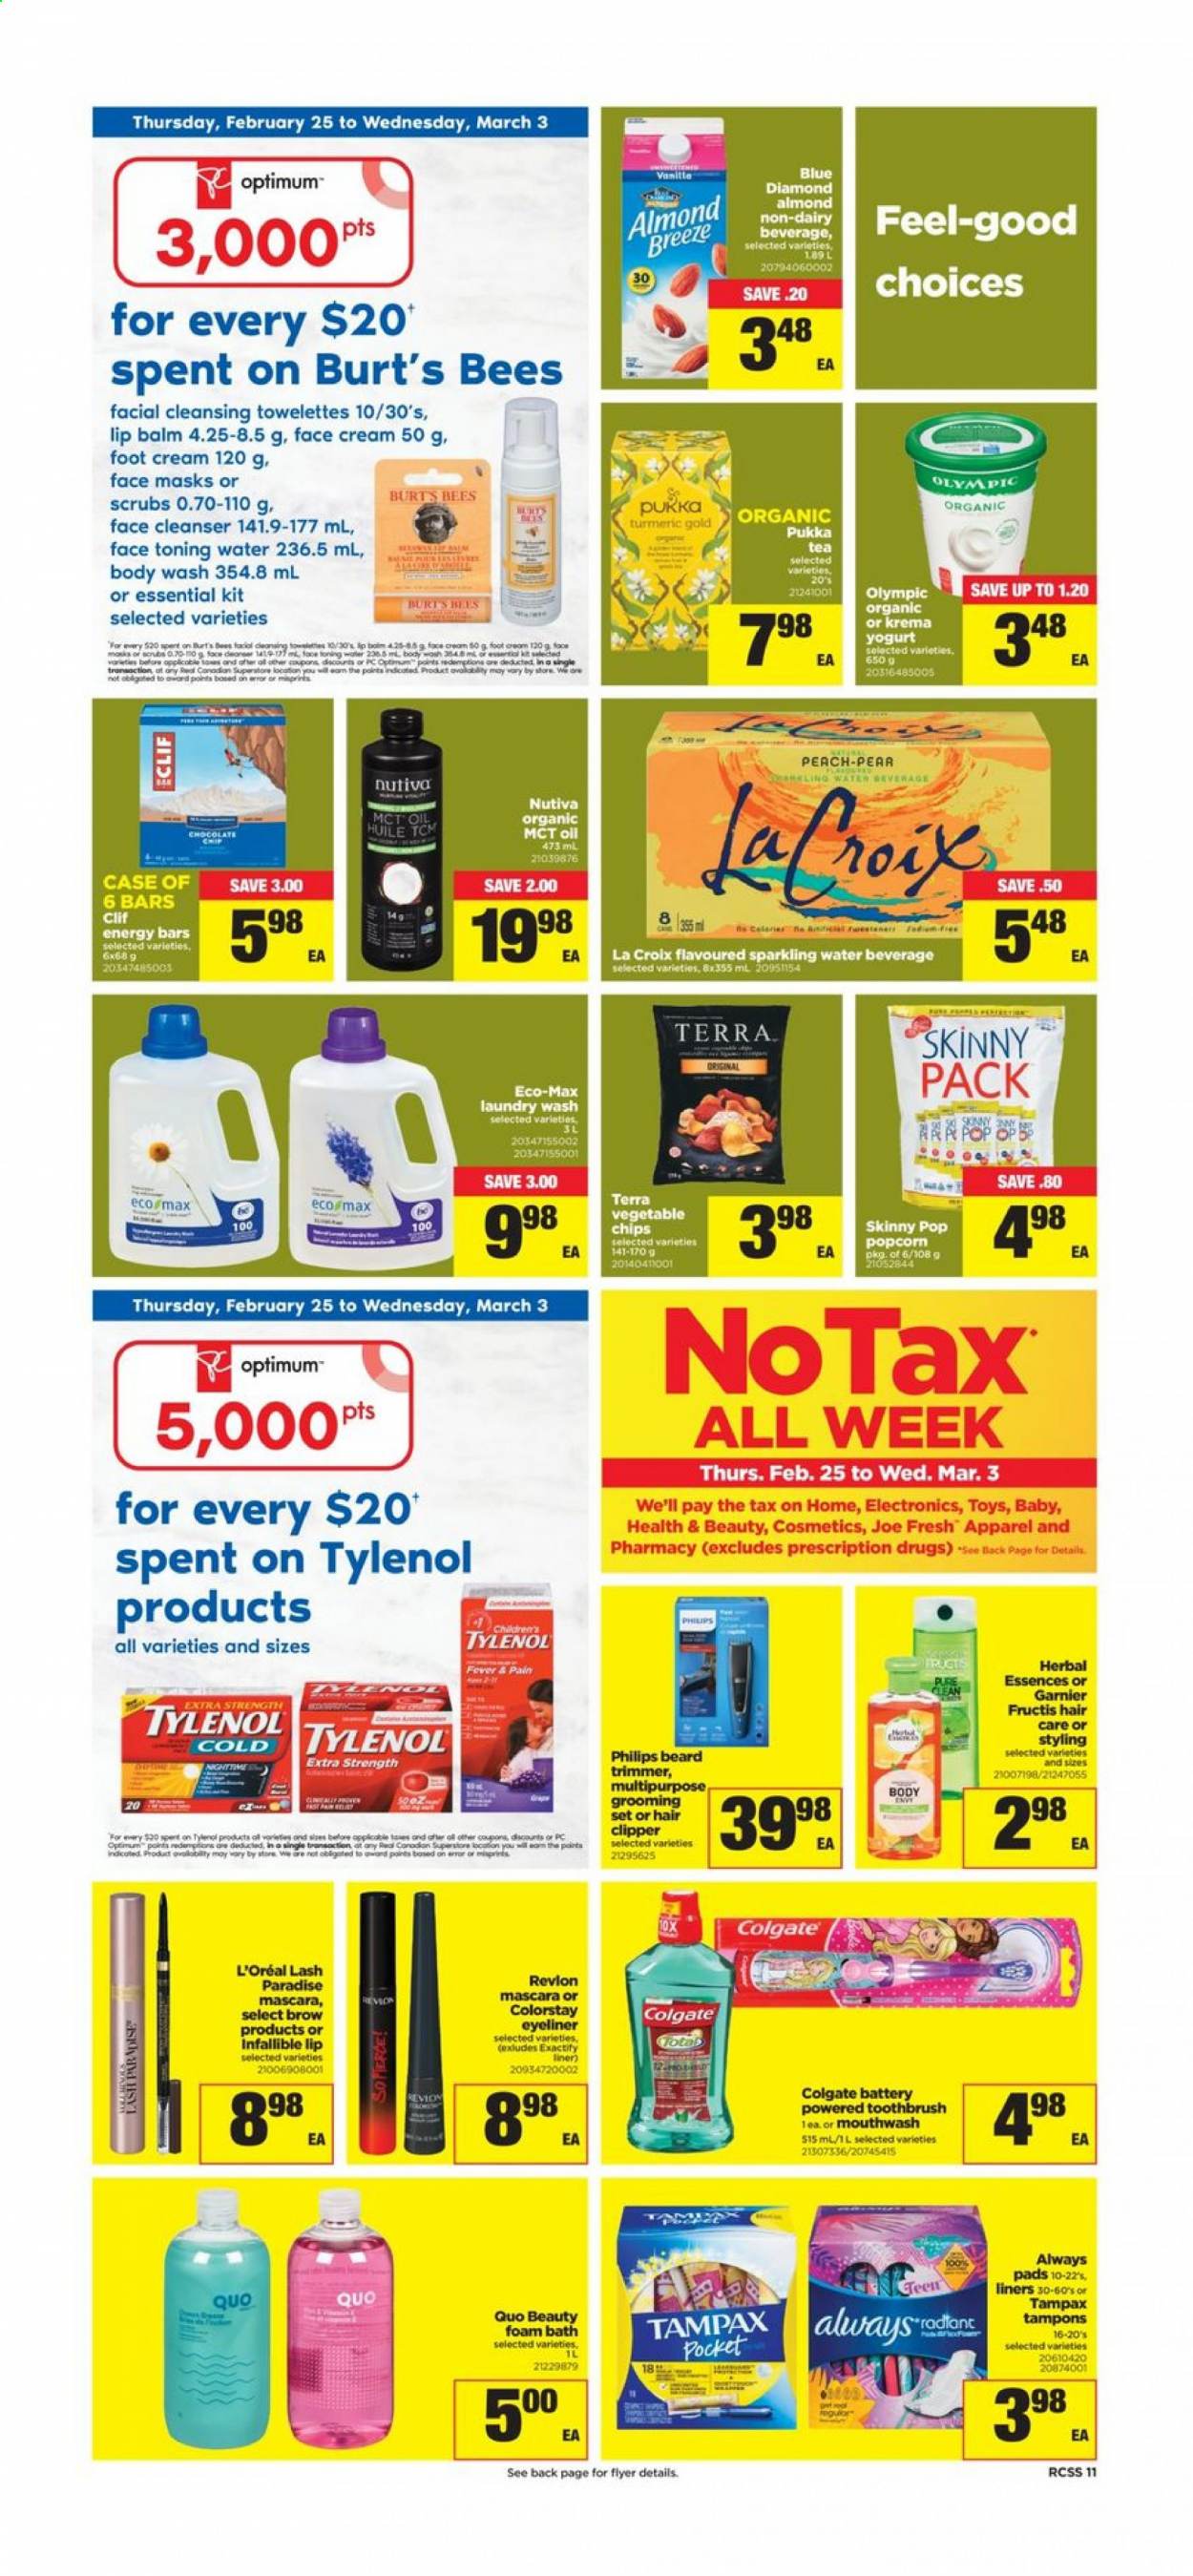 thumbnail - Circulaire Real Canadian Superstore - 25 Février 2021 - 03 Mars 2021 - Produits soldés - Philips, pain, chips, Fructis, huile, Always, Colgate, Garnier, Tampax, mascara. Page 11.